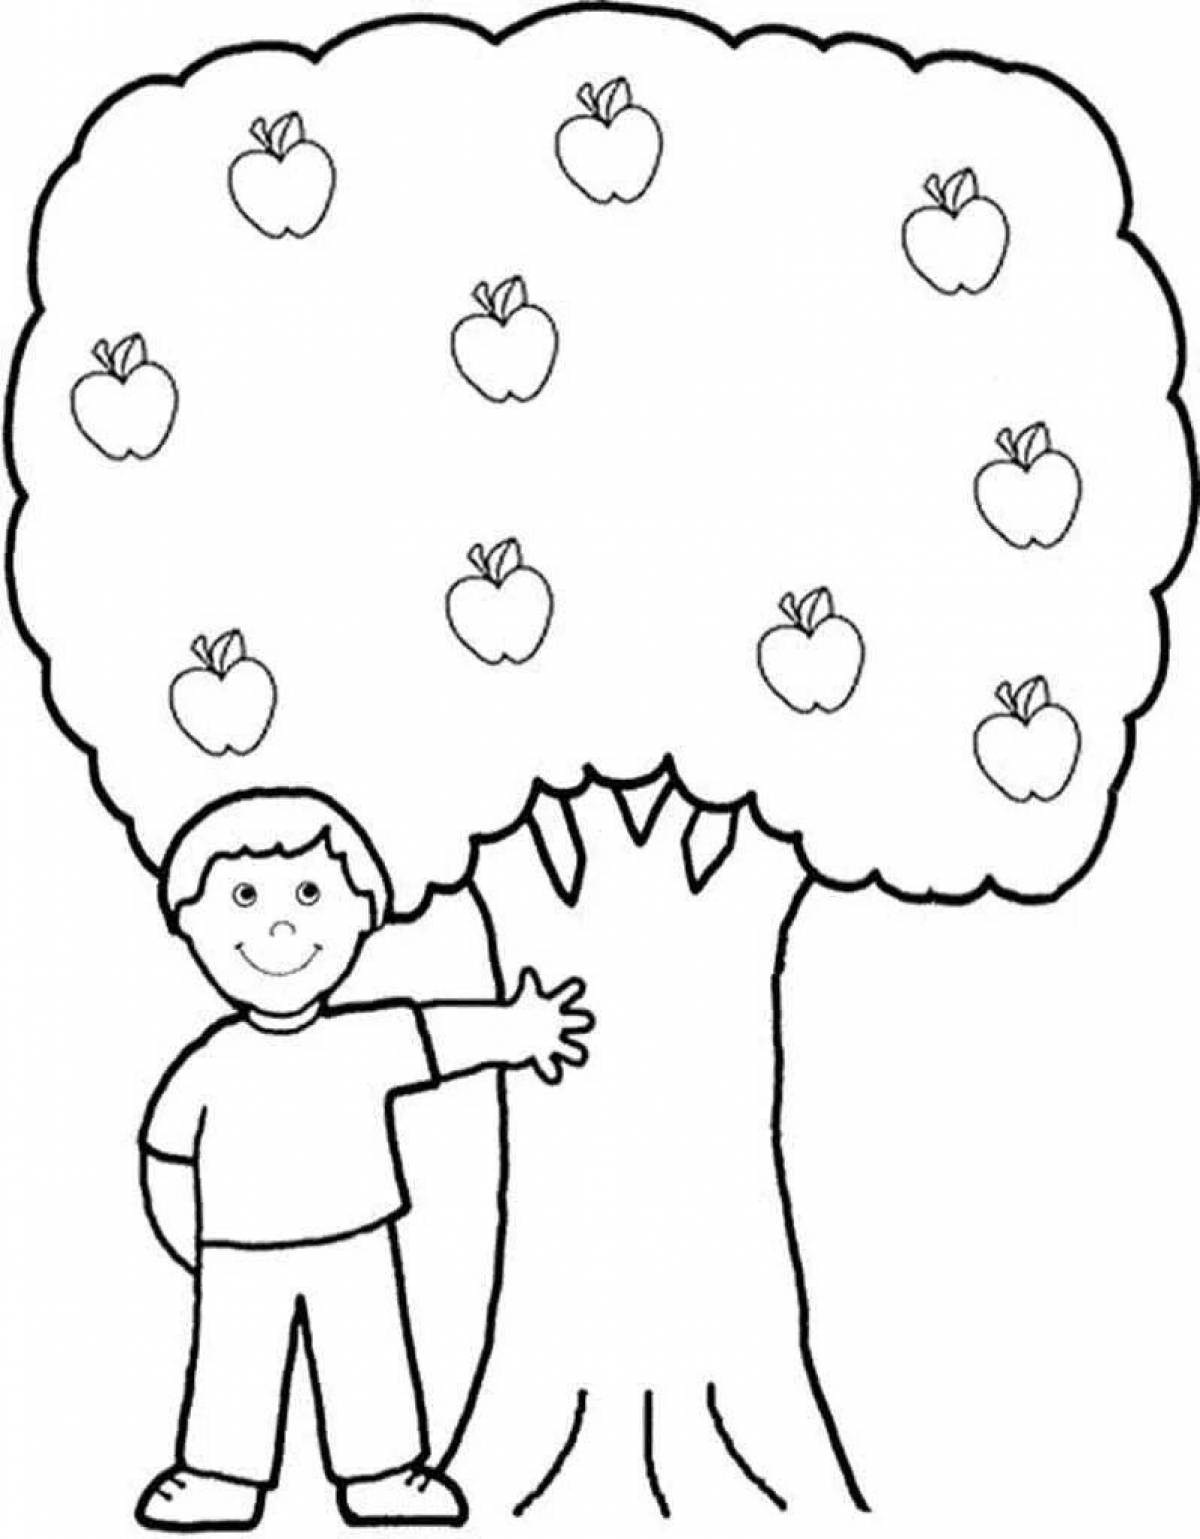 Humorous apple tree coloring book for kids